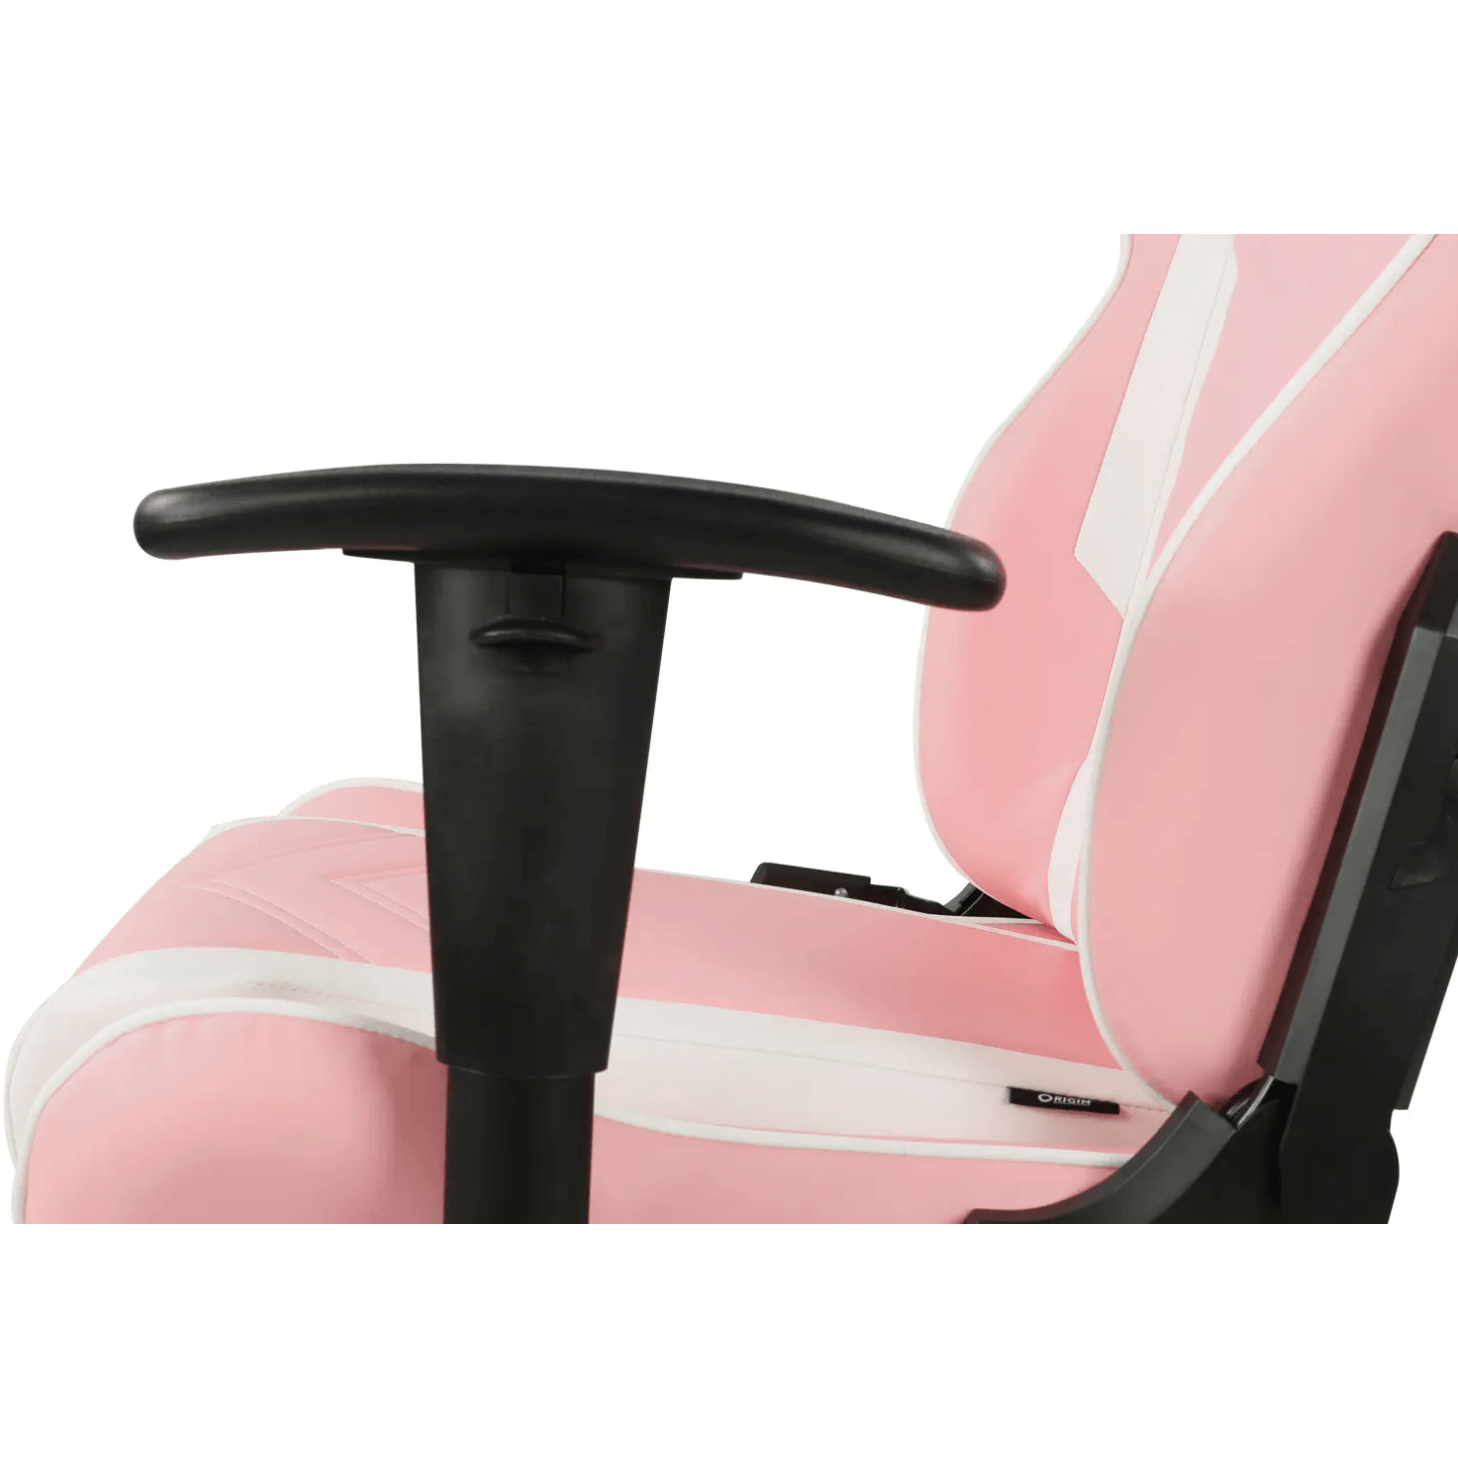 DXRacer Prince D6000 Pink Gaming Chair